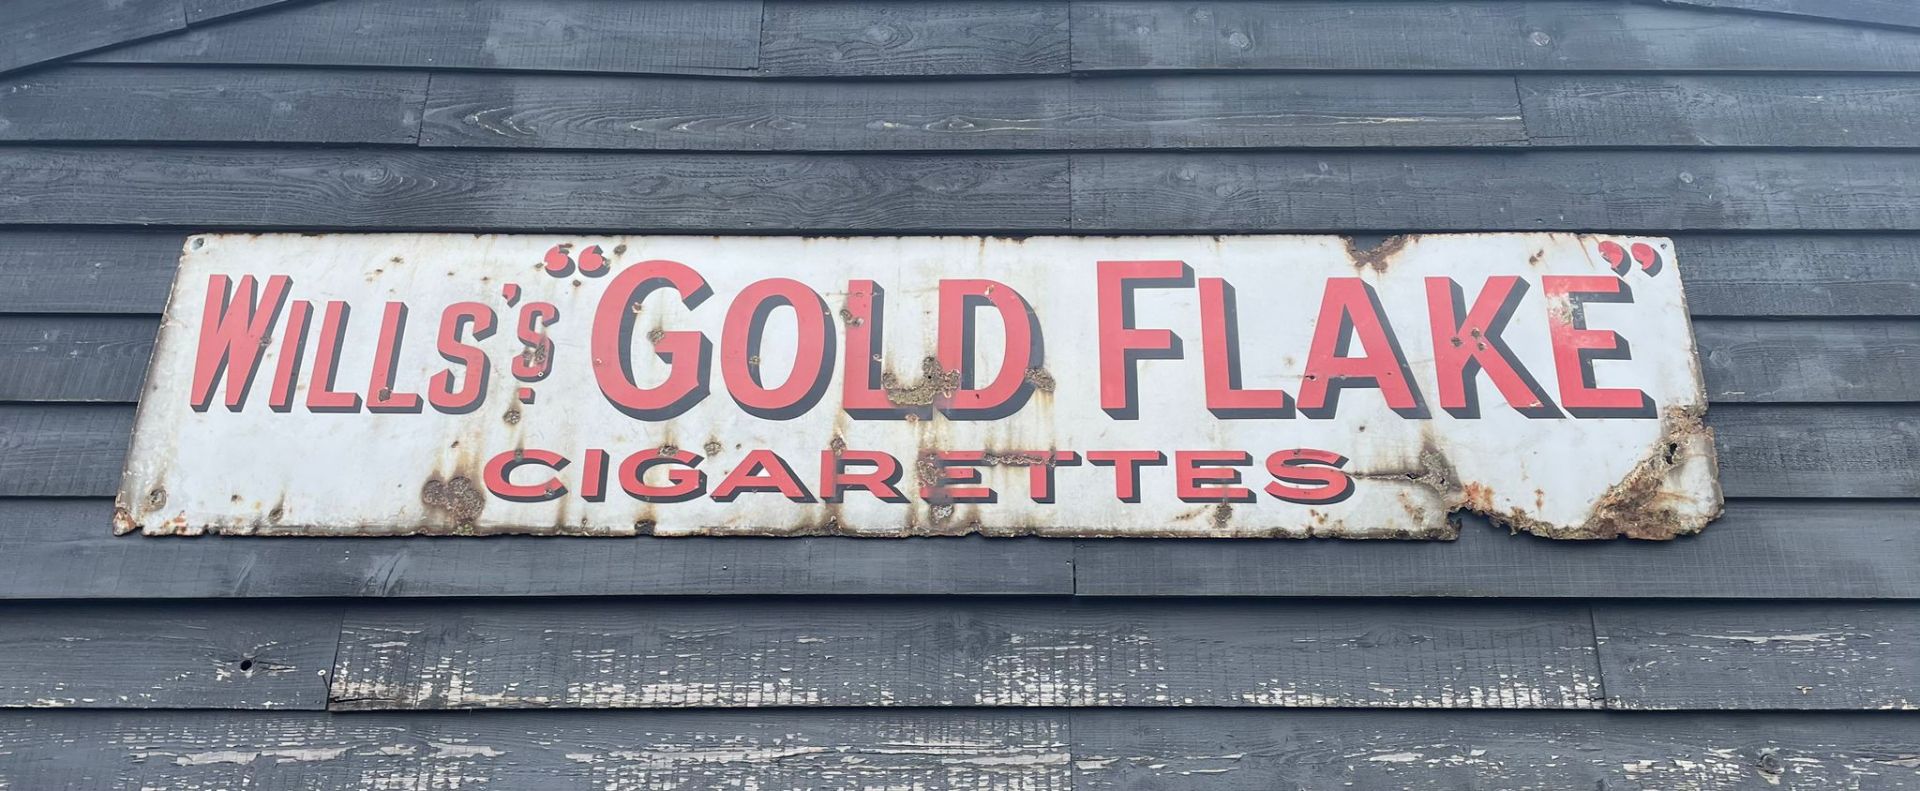 wills Gold Flake Cigarettes Sign - Image 3 of 5